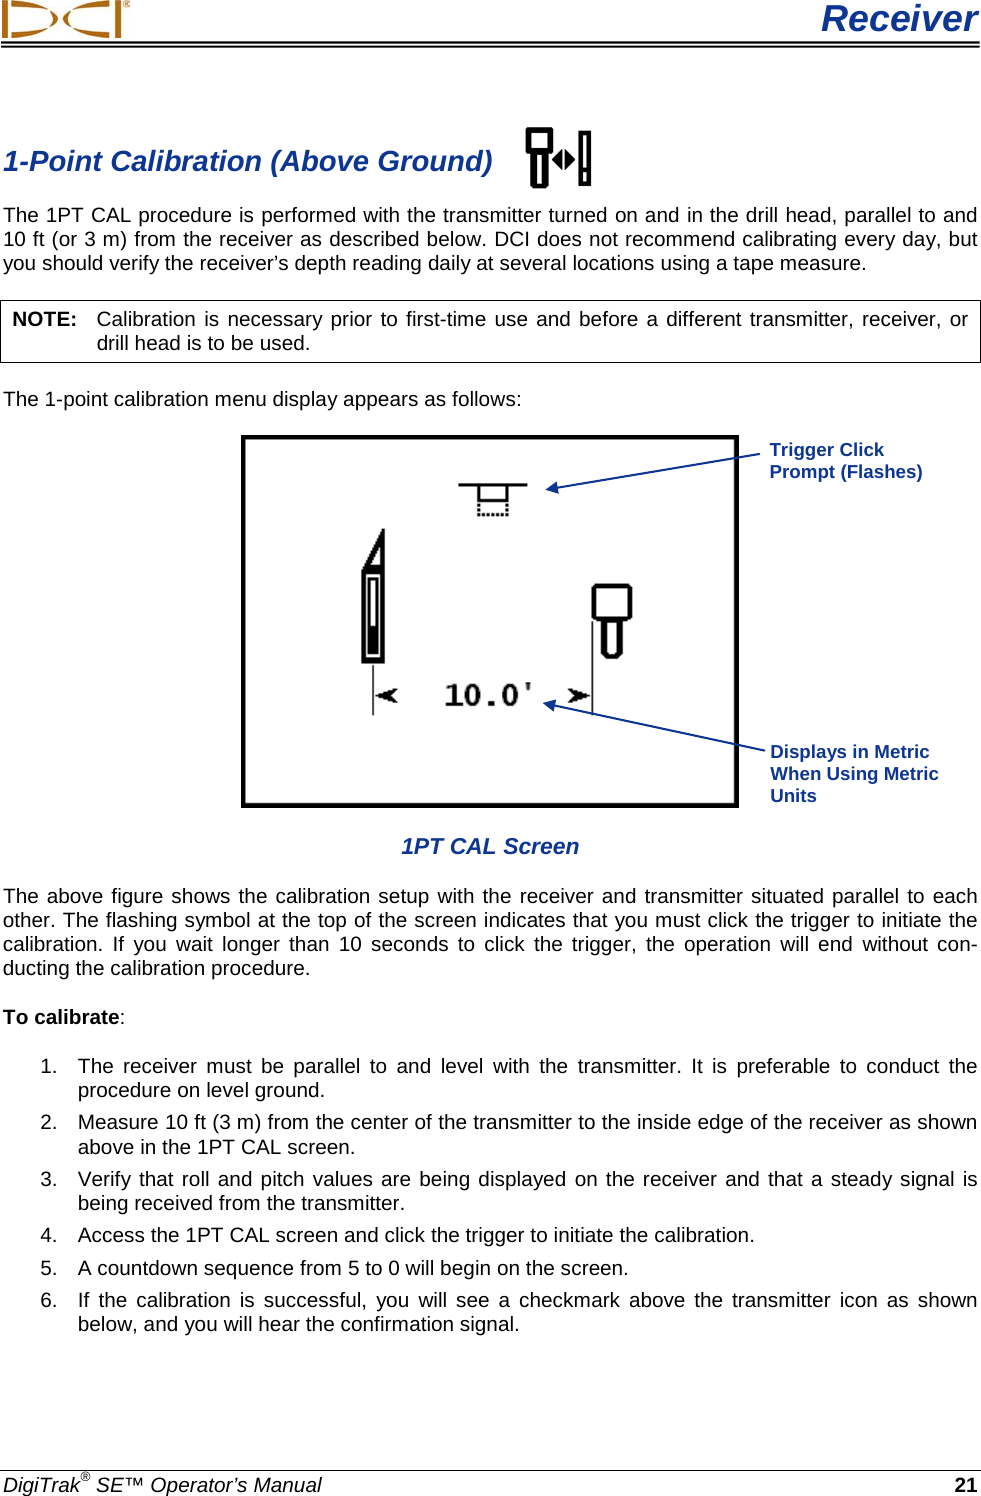  Receiver DigiTrak® SE™ Operator’s Manual 21 1-Point Calibration (Above Ground) The 1PT CAL procedure is performed with the transmitter turned on and in the drill head, parallel to and 10 ft (or 3 m) from the receiver as described below. DCI does not recommend calibrating every day, but you should verify the receiver’s depth reading daily at several locations using a tape measure. NOTE:   Calibration is necessary prior to first-time use and before a different transmitter, receiver, or drill head is to be used. The 1-point calibration menu display appears as follows:  1PT CAL Screen The above figure shows the calibration setup with the receiver and transmitter situated parallel to each other. The flashing symbol at the top of the screen indicates that you must click the trigger to initiate the calibration.  If you wait longer than 10 seconds to click the trigger,  the operation will end without con-ducting the calibration procedure. To calibrate:  1.  The receiver must be parallel to and level with the transmitter.  It is preferable to conduct the procedure on level ground. 2. Measure 10 ft (3 m) from the center of the transmitter to the inside edge of the receiver as shown above in the 1PT CAL screen. 3. Verify that roll and pitch values are being displayed on the receiver and that a steady signal is being received from the transmitter.  4. Access the 1PT CAL screen and click the trigger to initiate the calibration. 5. A countdown sequence from 5 to 0 will begin on the screen. 6. If the calibration  is successful, you will  see a checkmark above the transmitter icon as shown below, and you will hear the confirmation signal.   Trigger Click Prompt (Flashes) Displays in Metric When Using Metric Units  